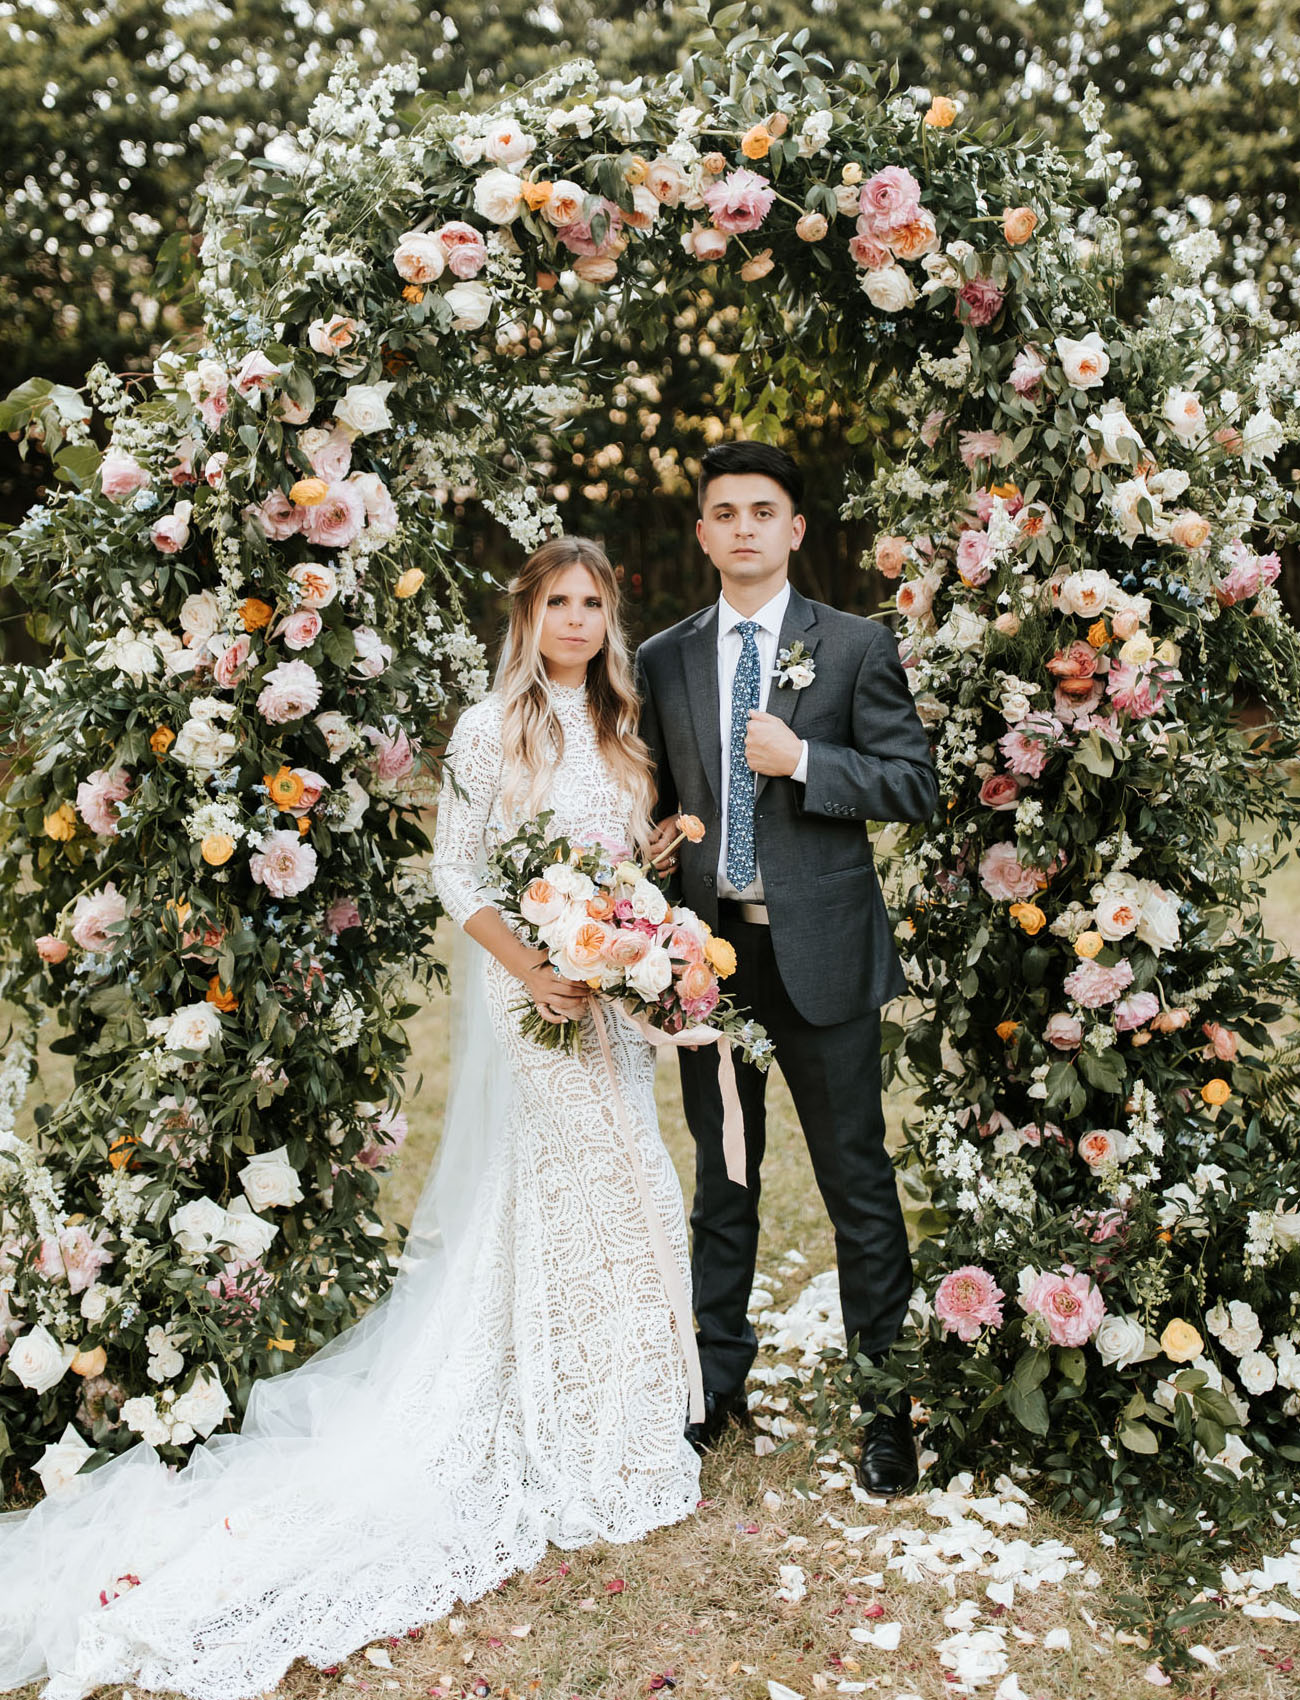 A Floral-Filled Backyard Wedding Ceremony in the Midst of ...